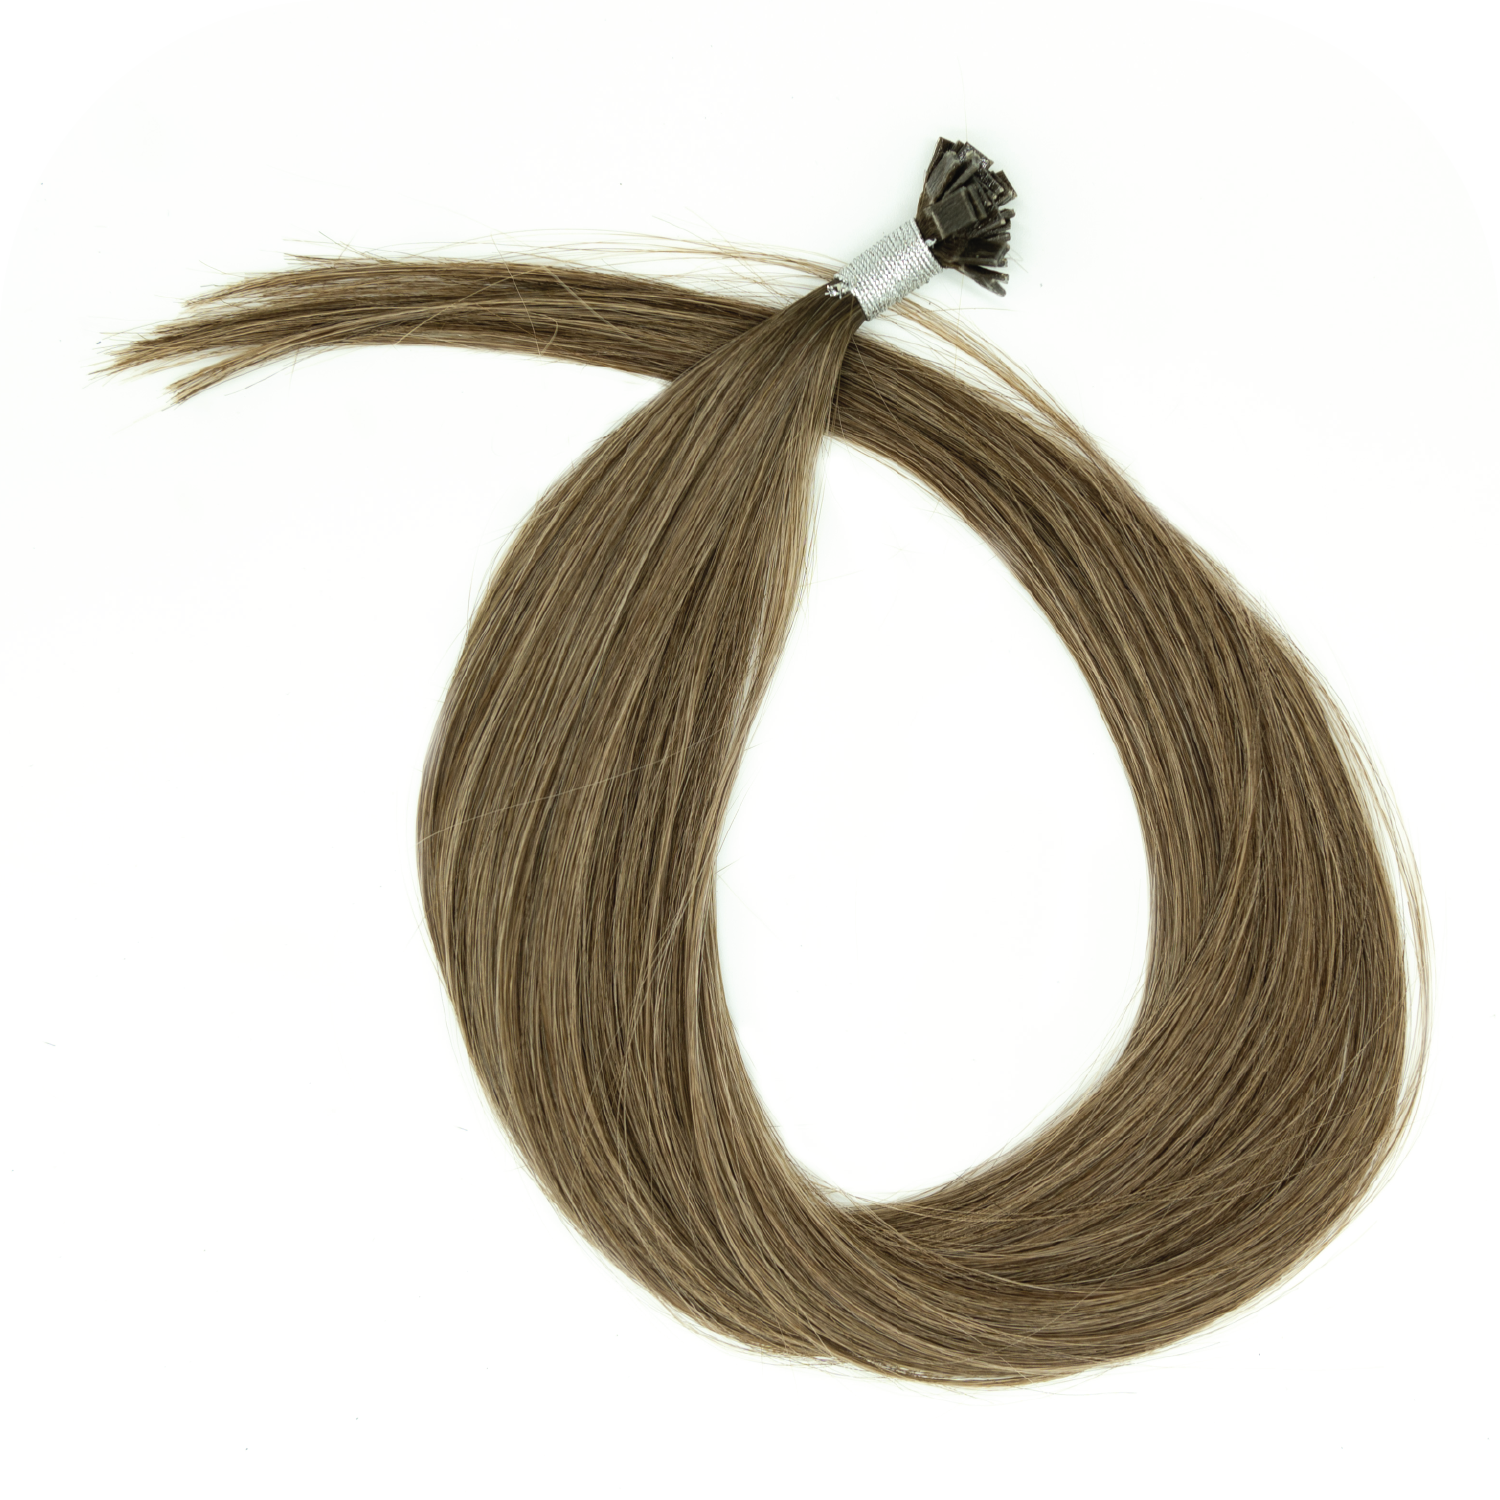 Couture Hair Co. Couture Tip or K Tip Extensions in Color Brown Mix #4/4/18